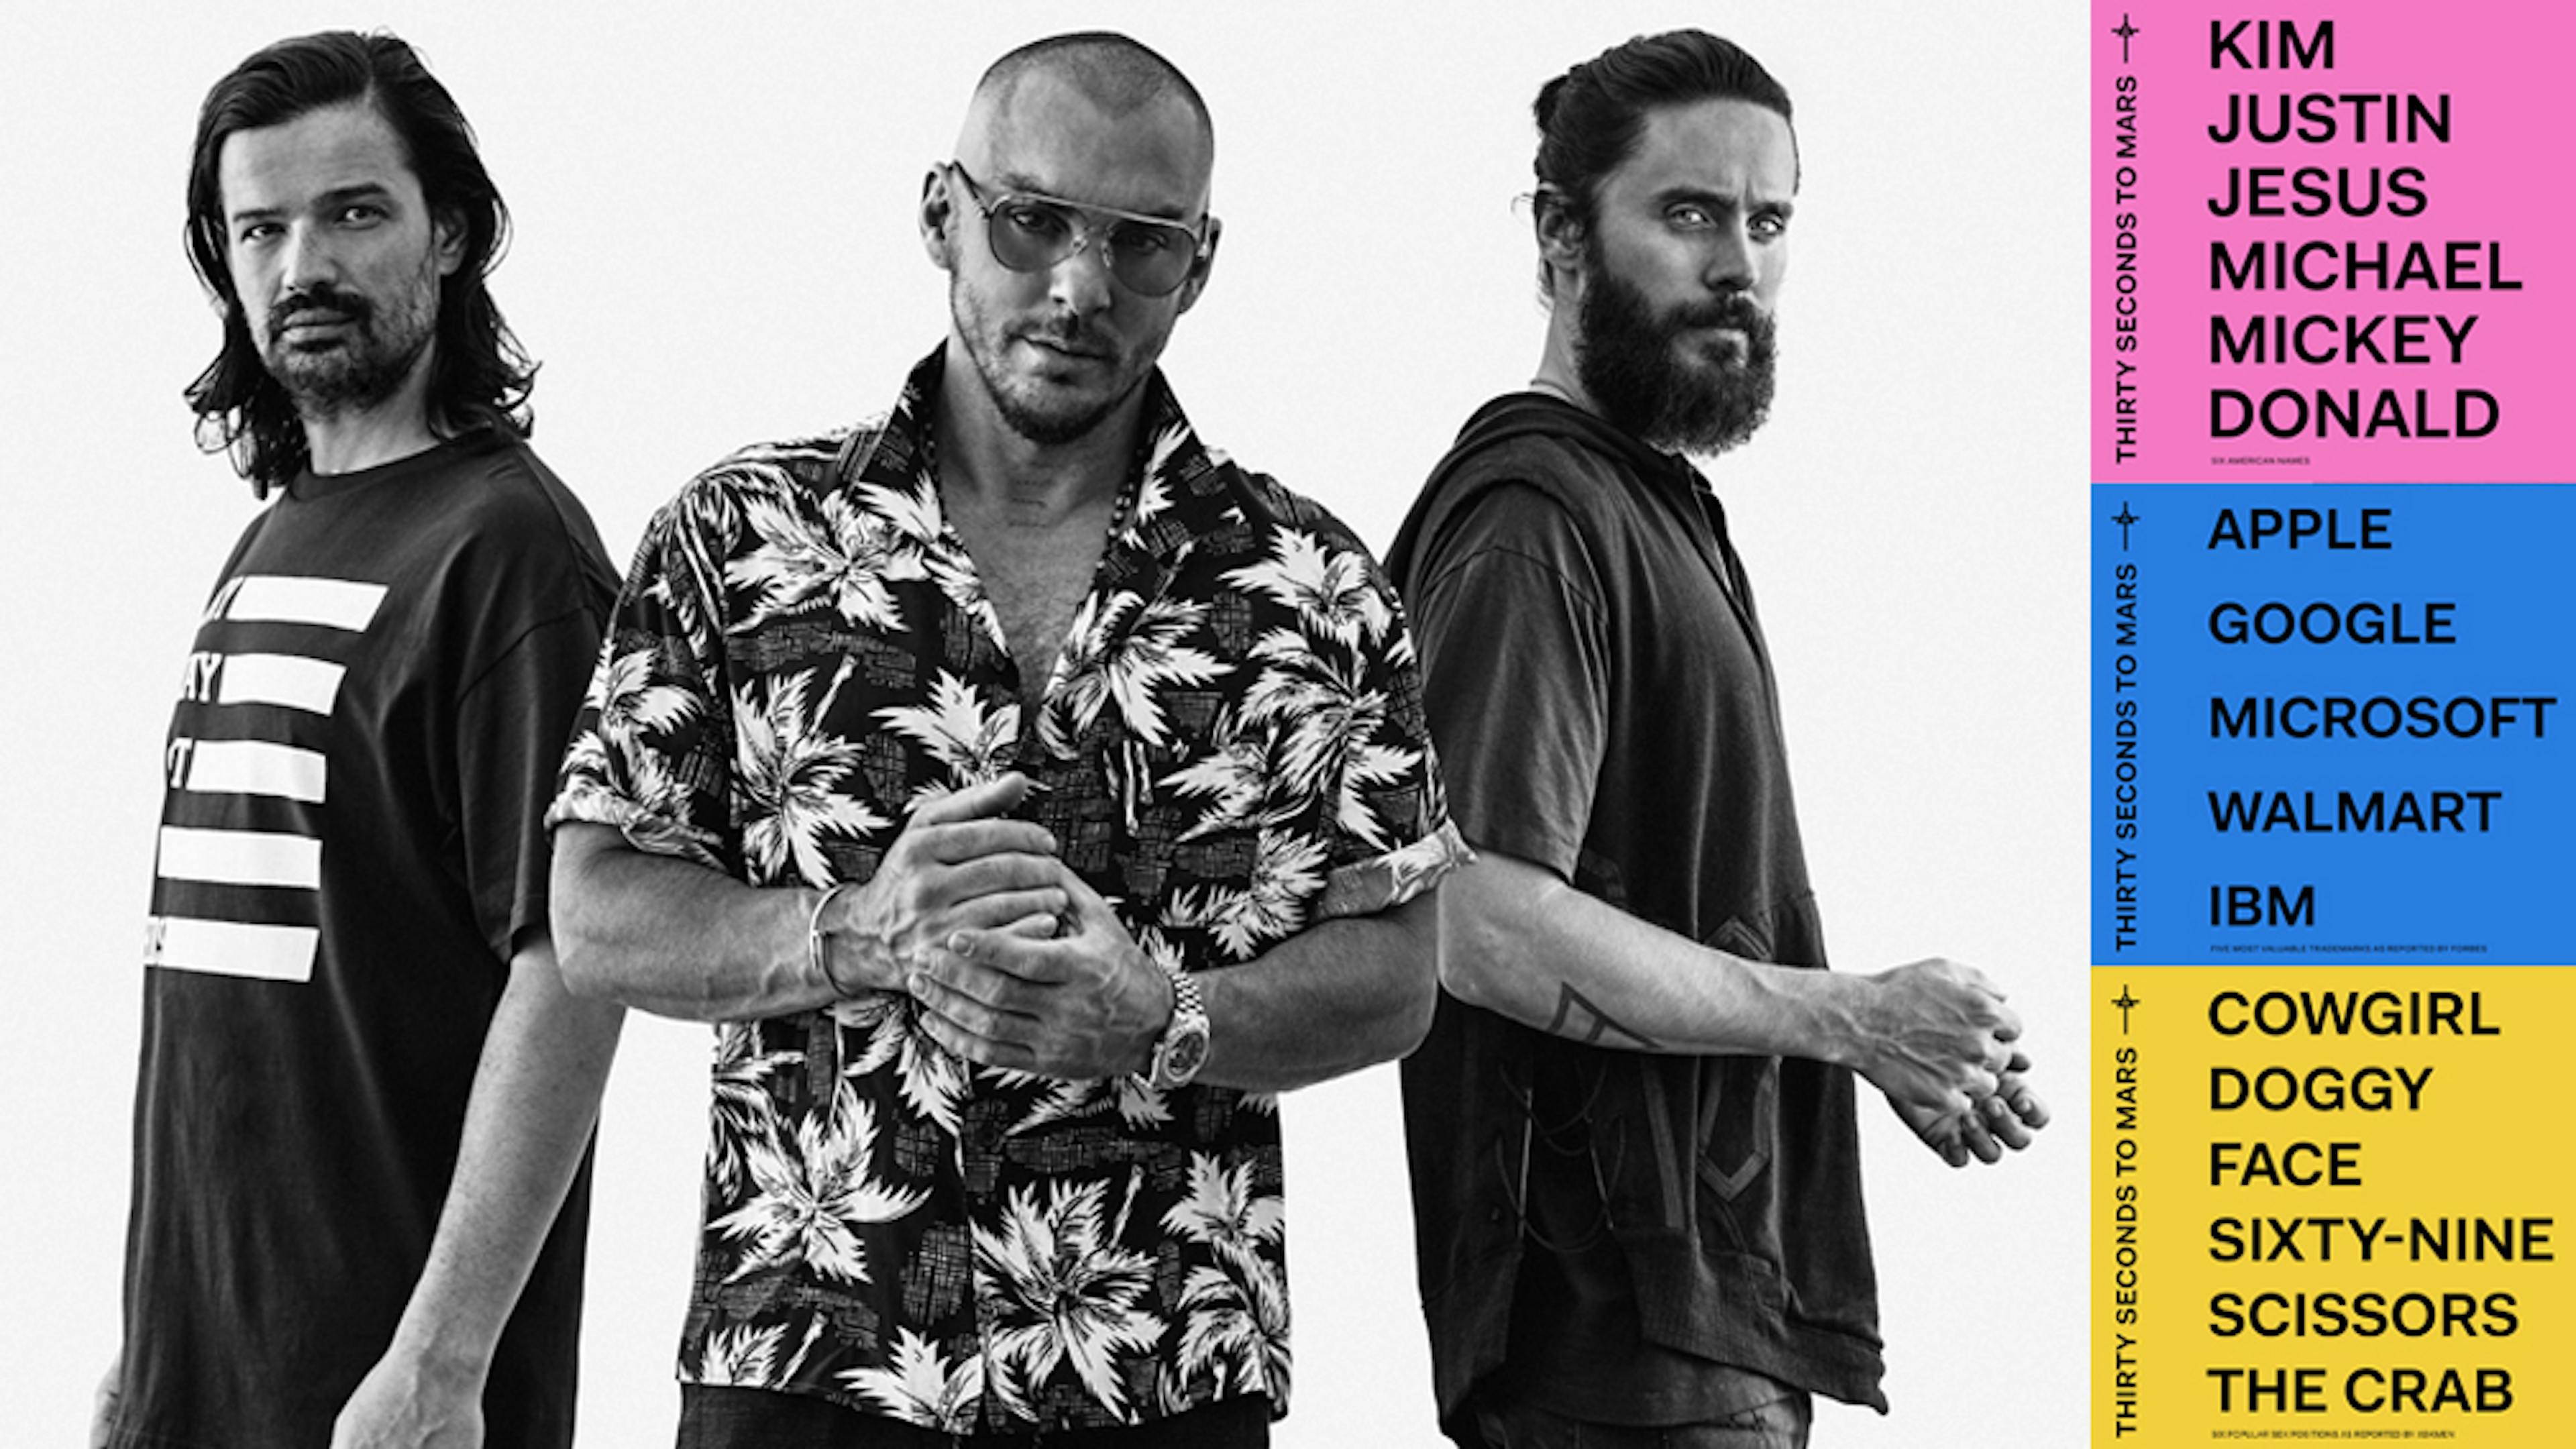 Listen To Thirty Seconds To Mars' New Album